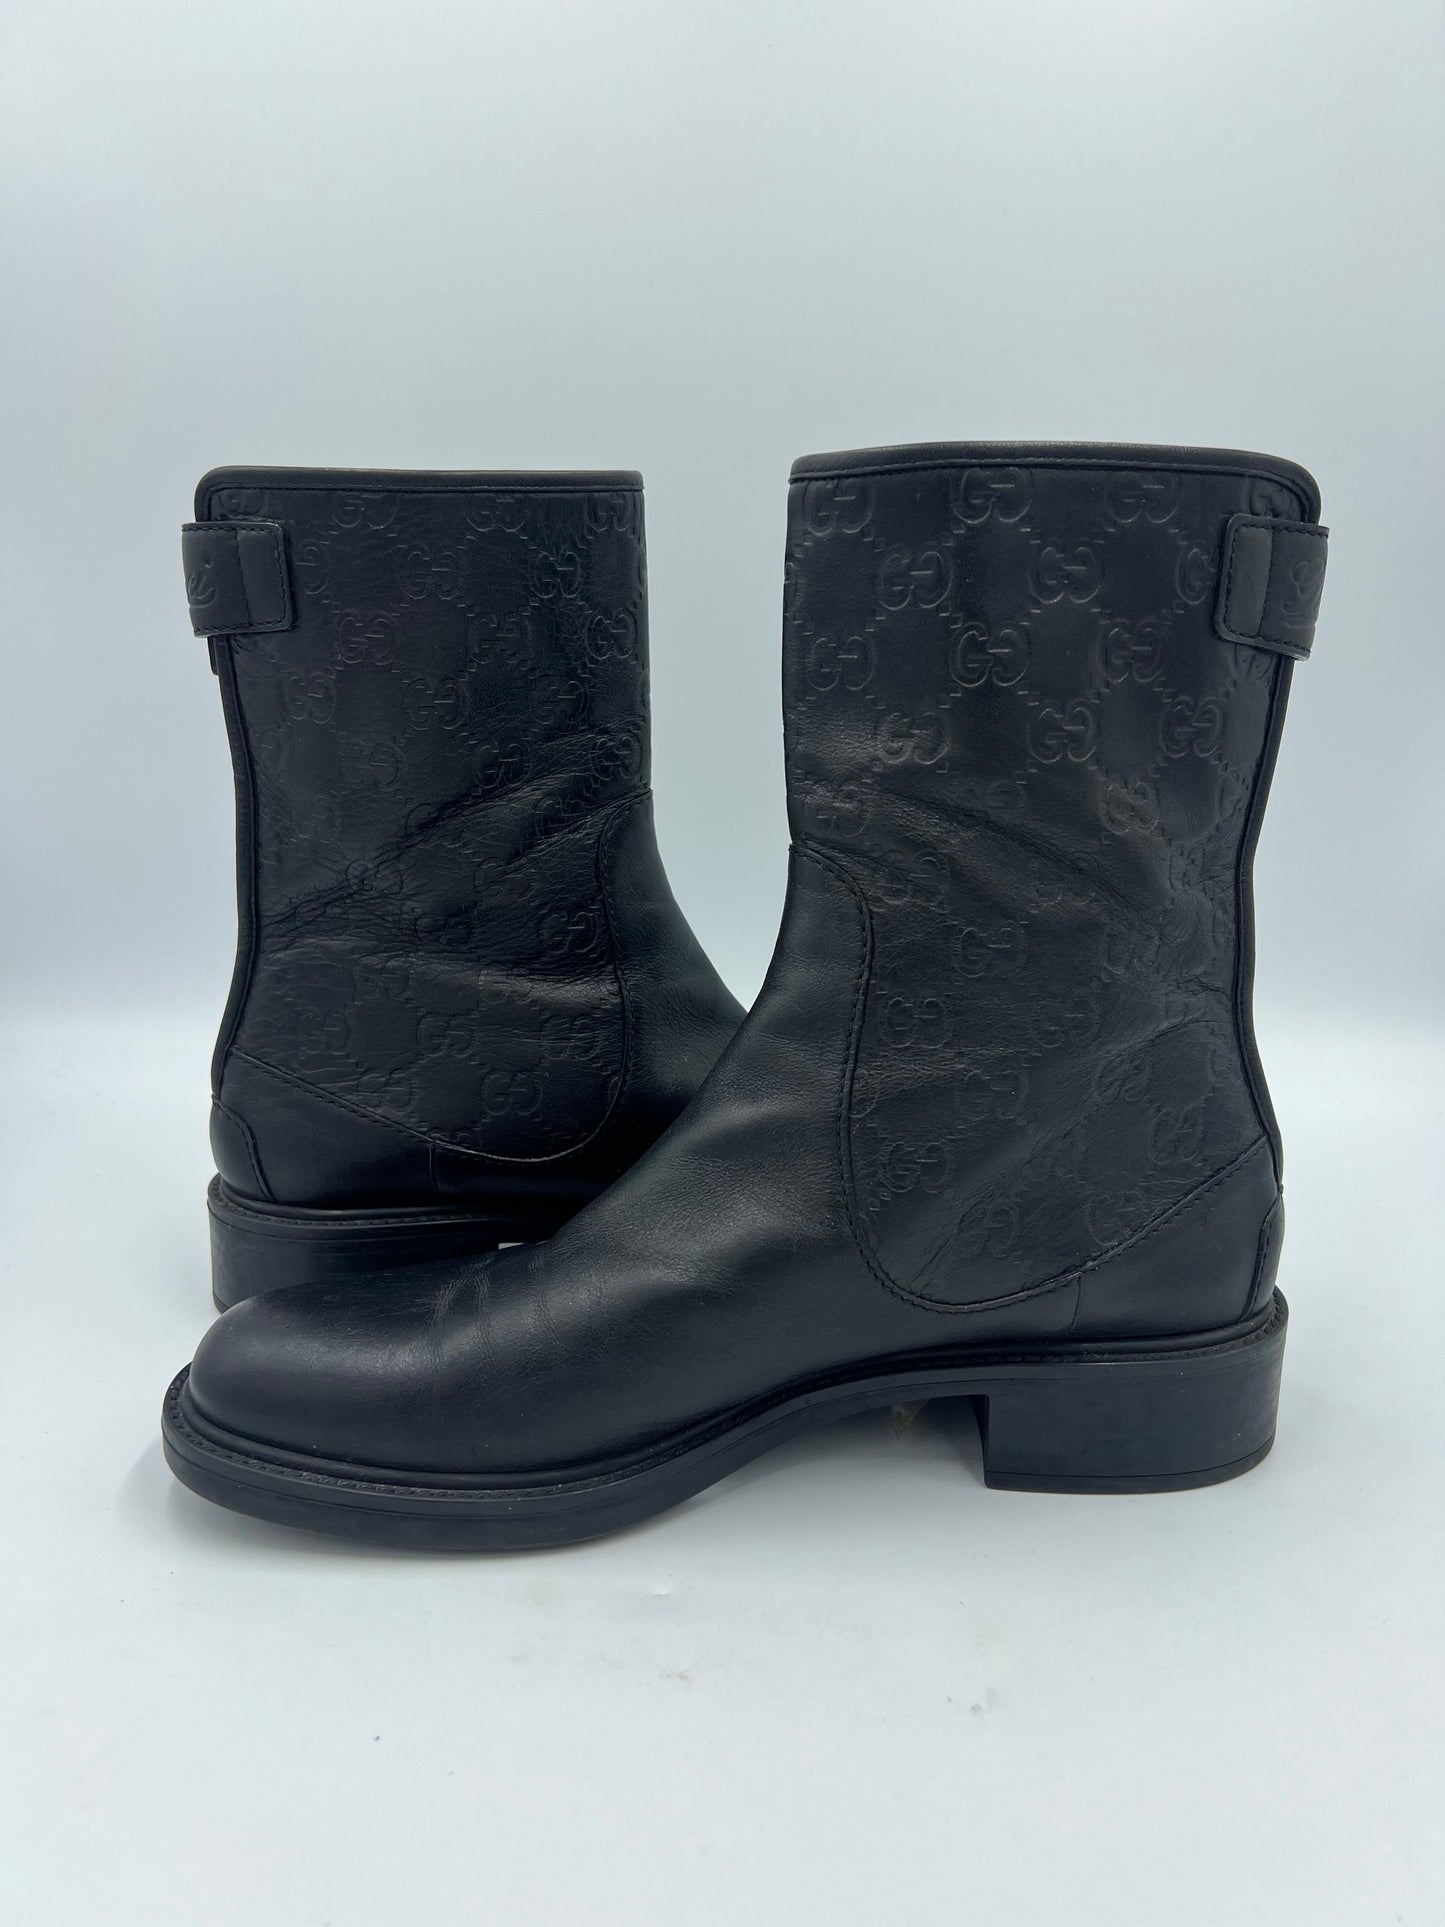 Gucci GG Imprint Leather Logo Boots   Size: 8